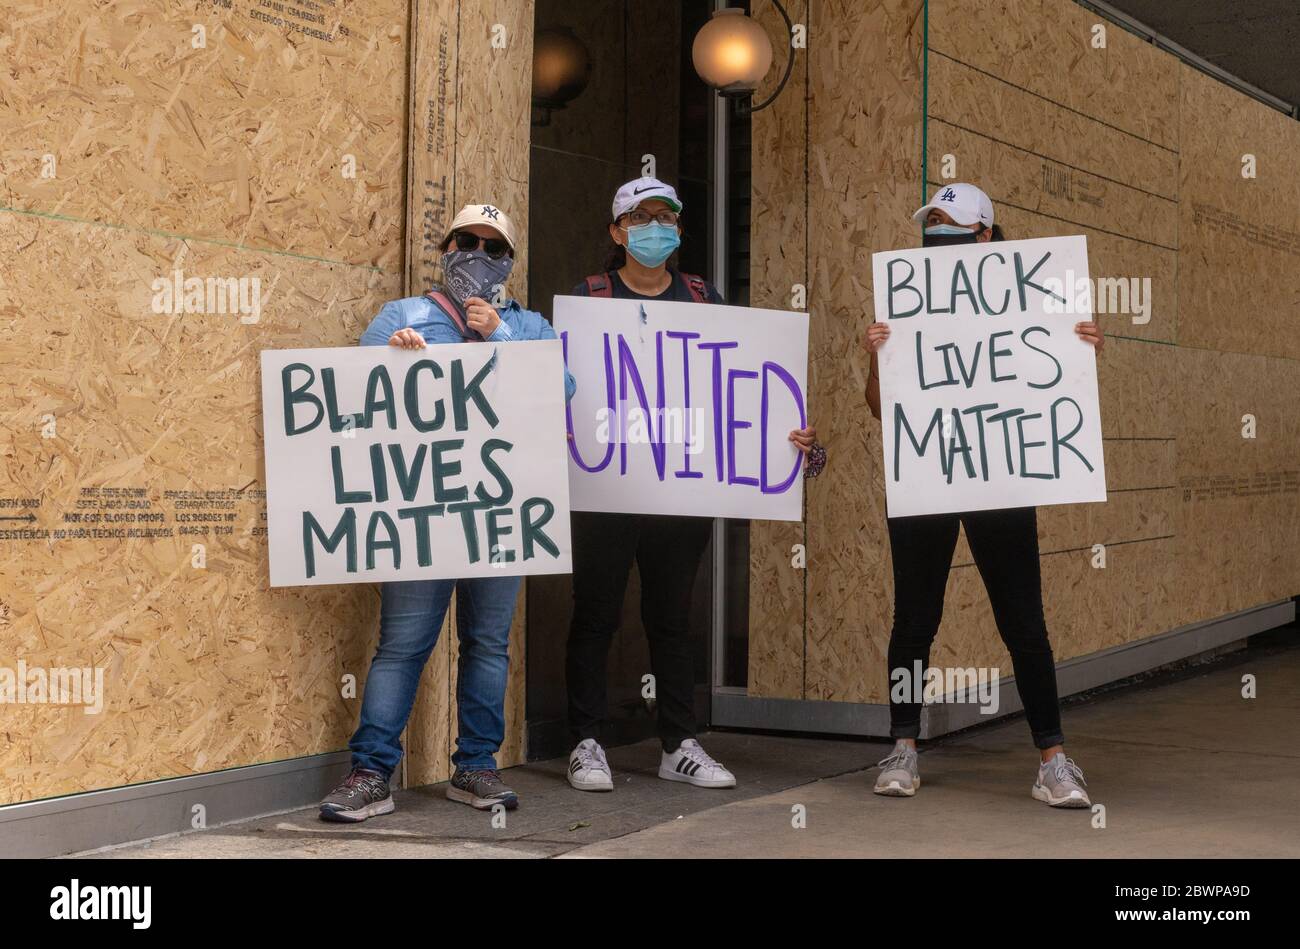 Los Angeles, USA, 3rd June, 2020. Protesters with Black Lives Matter signs in front of boarded up building Downtown. Credit: Jim Newberry/Alamy Live News. Stock Photo